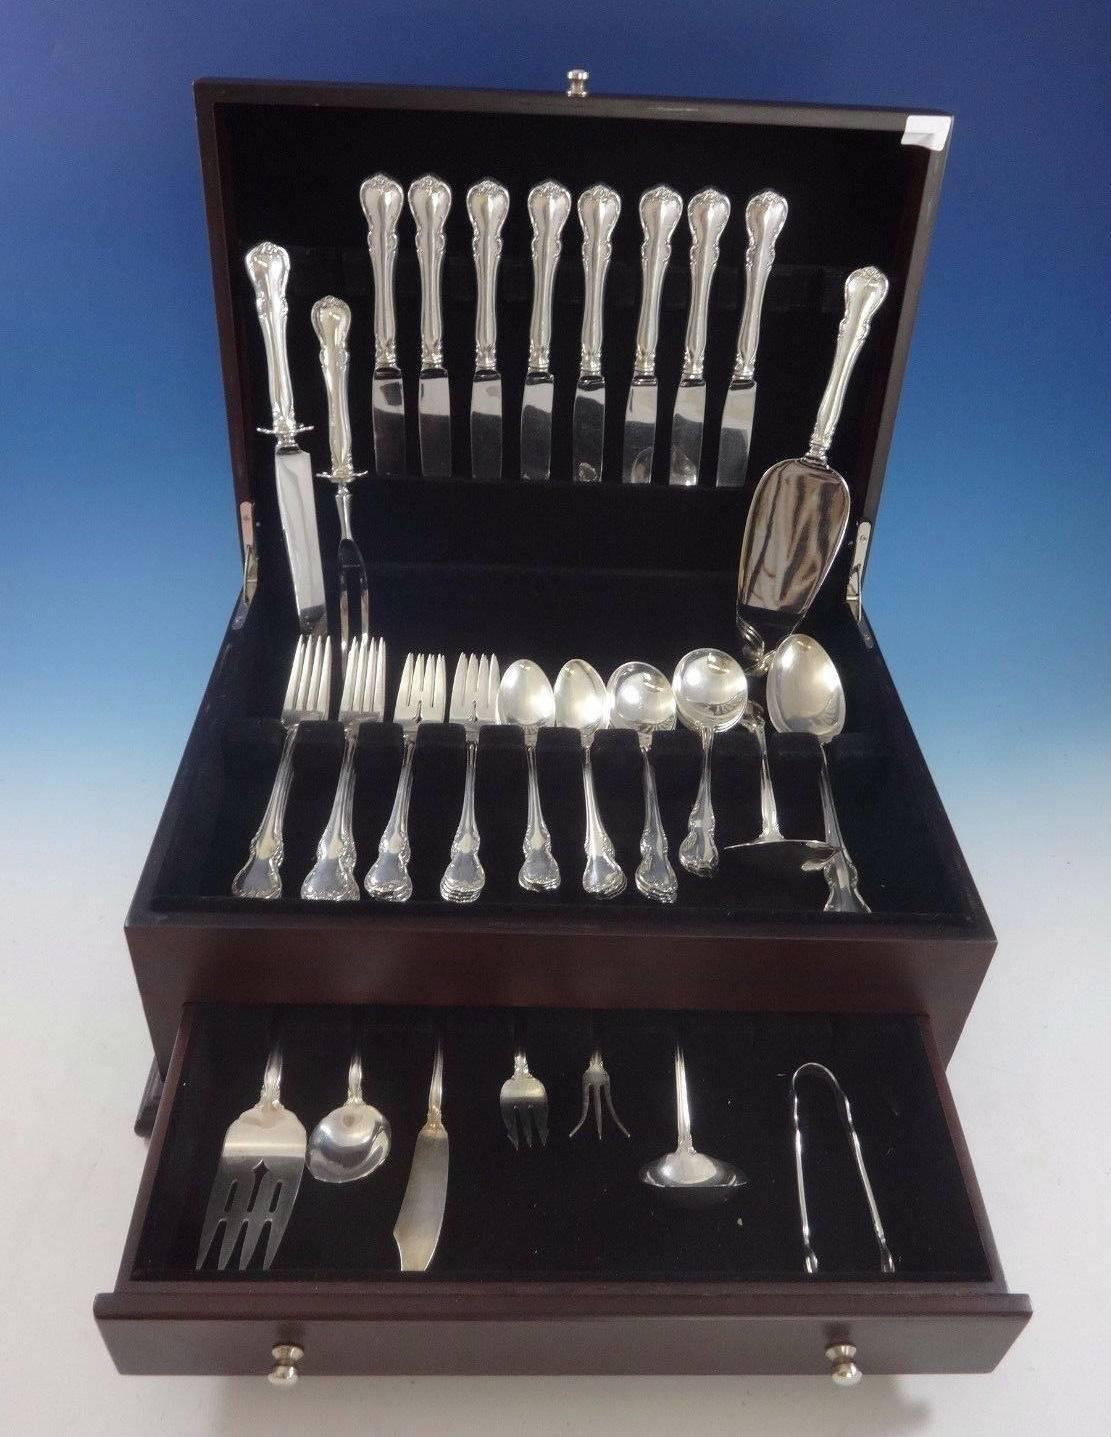 French Provincial by Towle sterling silver flatware set of 52 pieces. This set includes: 

Eight knives, 8 7/8